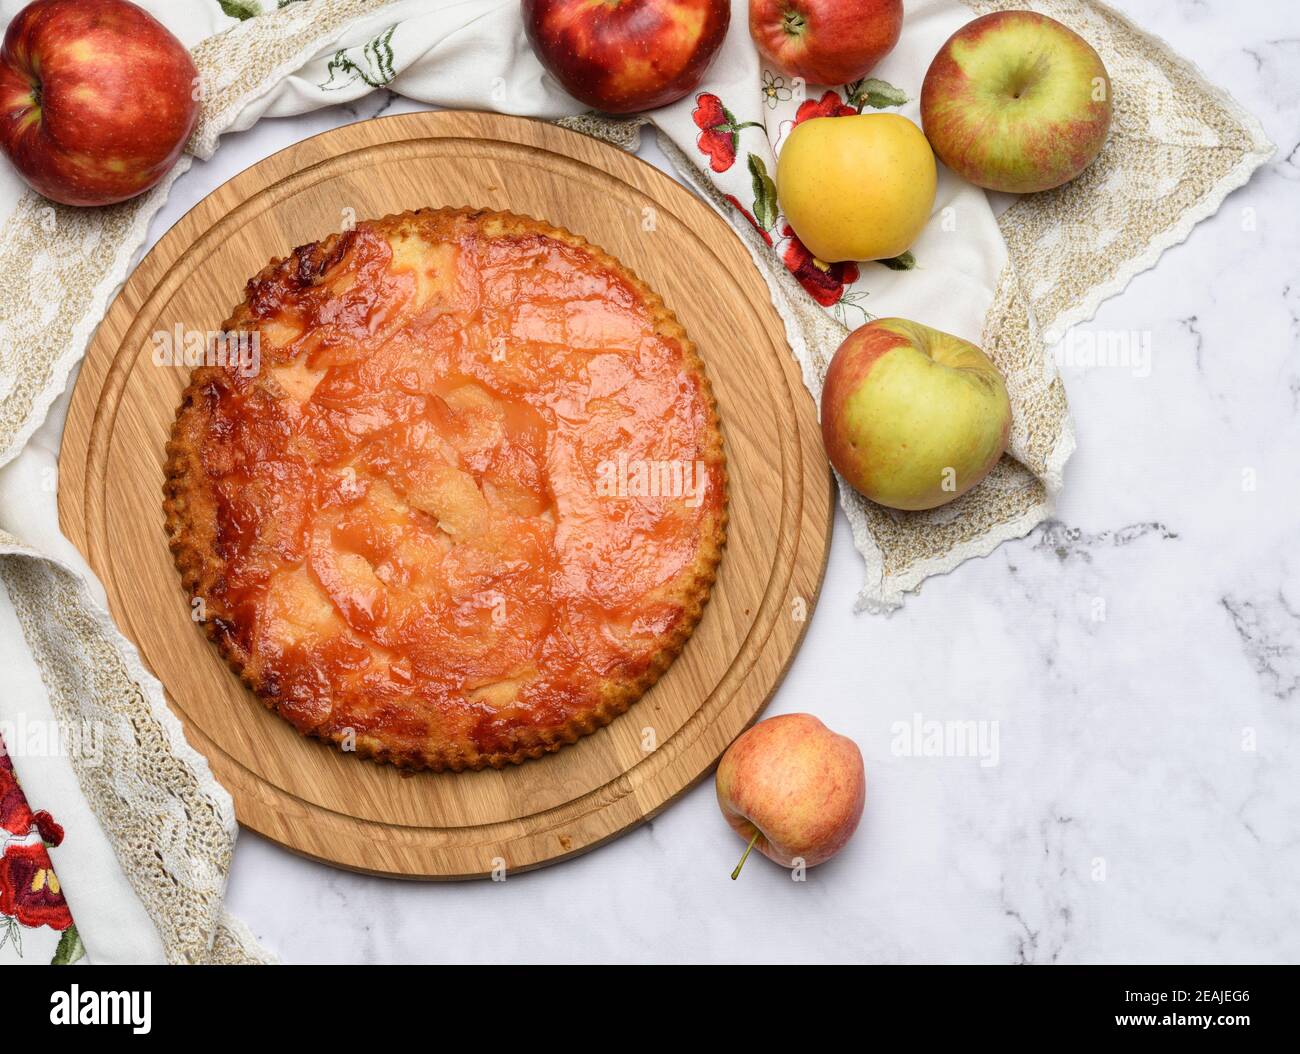 baked round apple pie on wooden board and fresh apples, top view Stock Photo